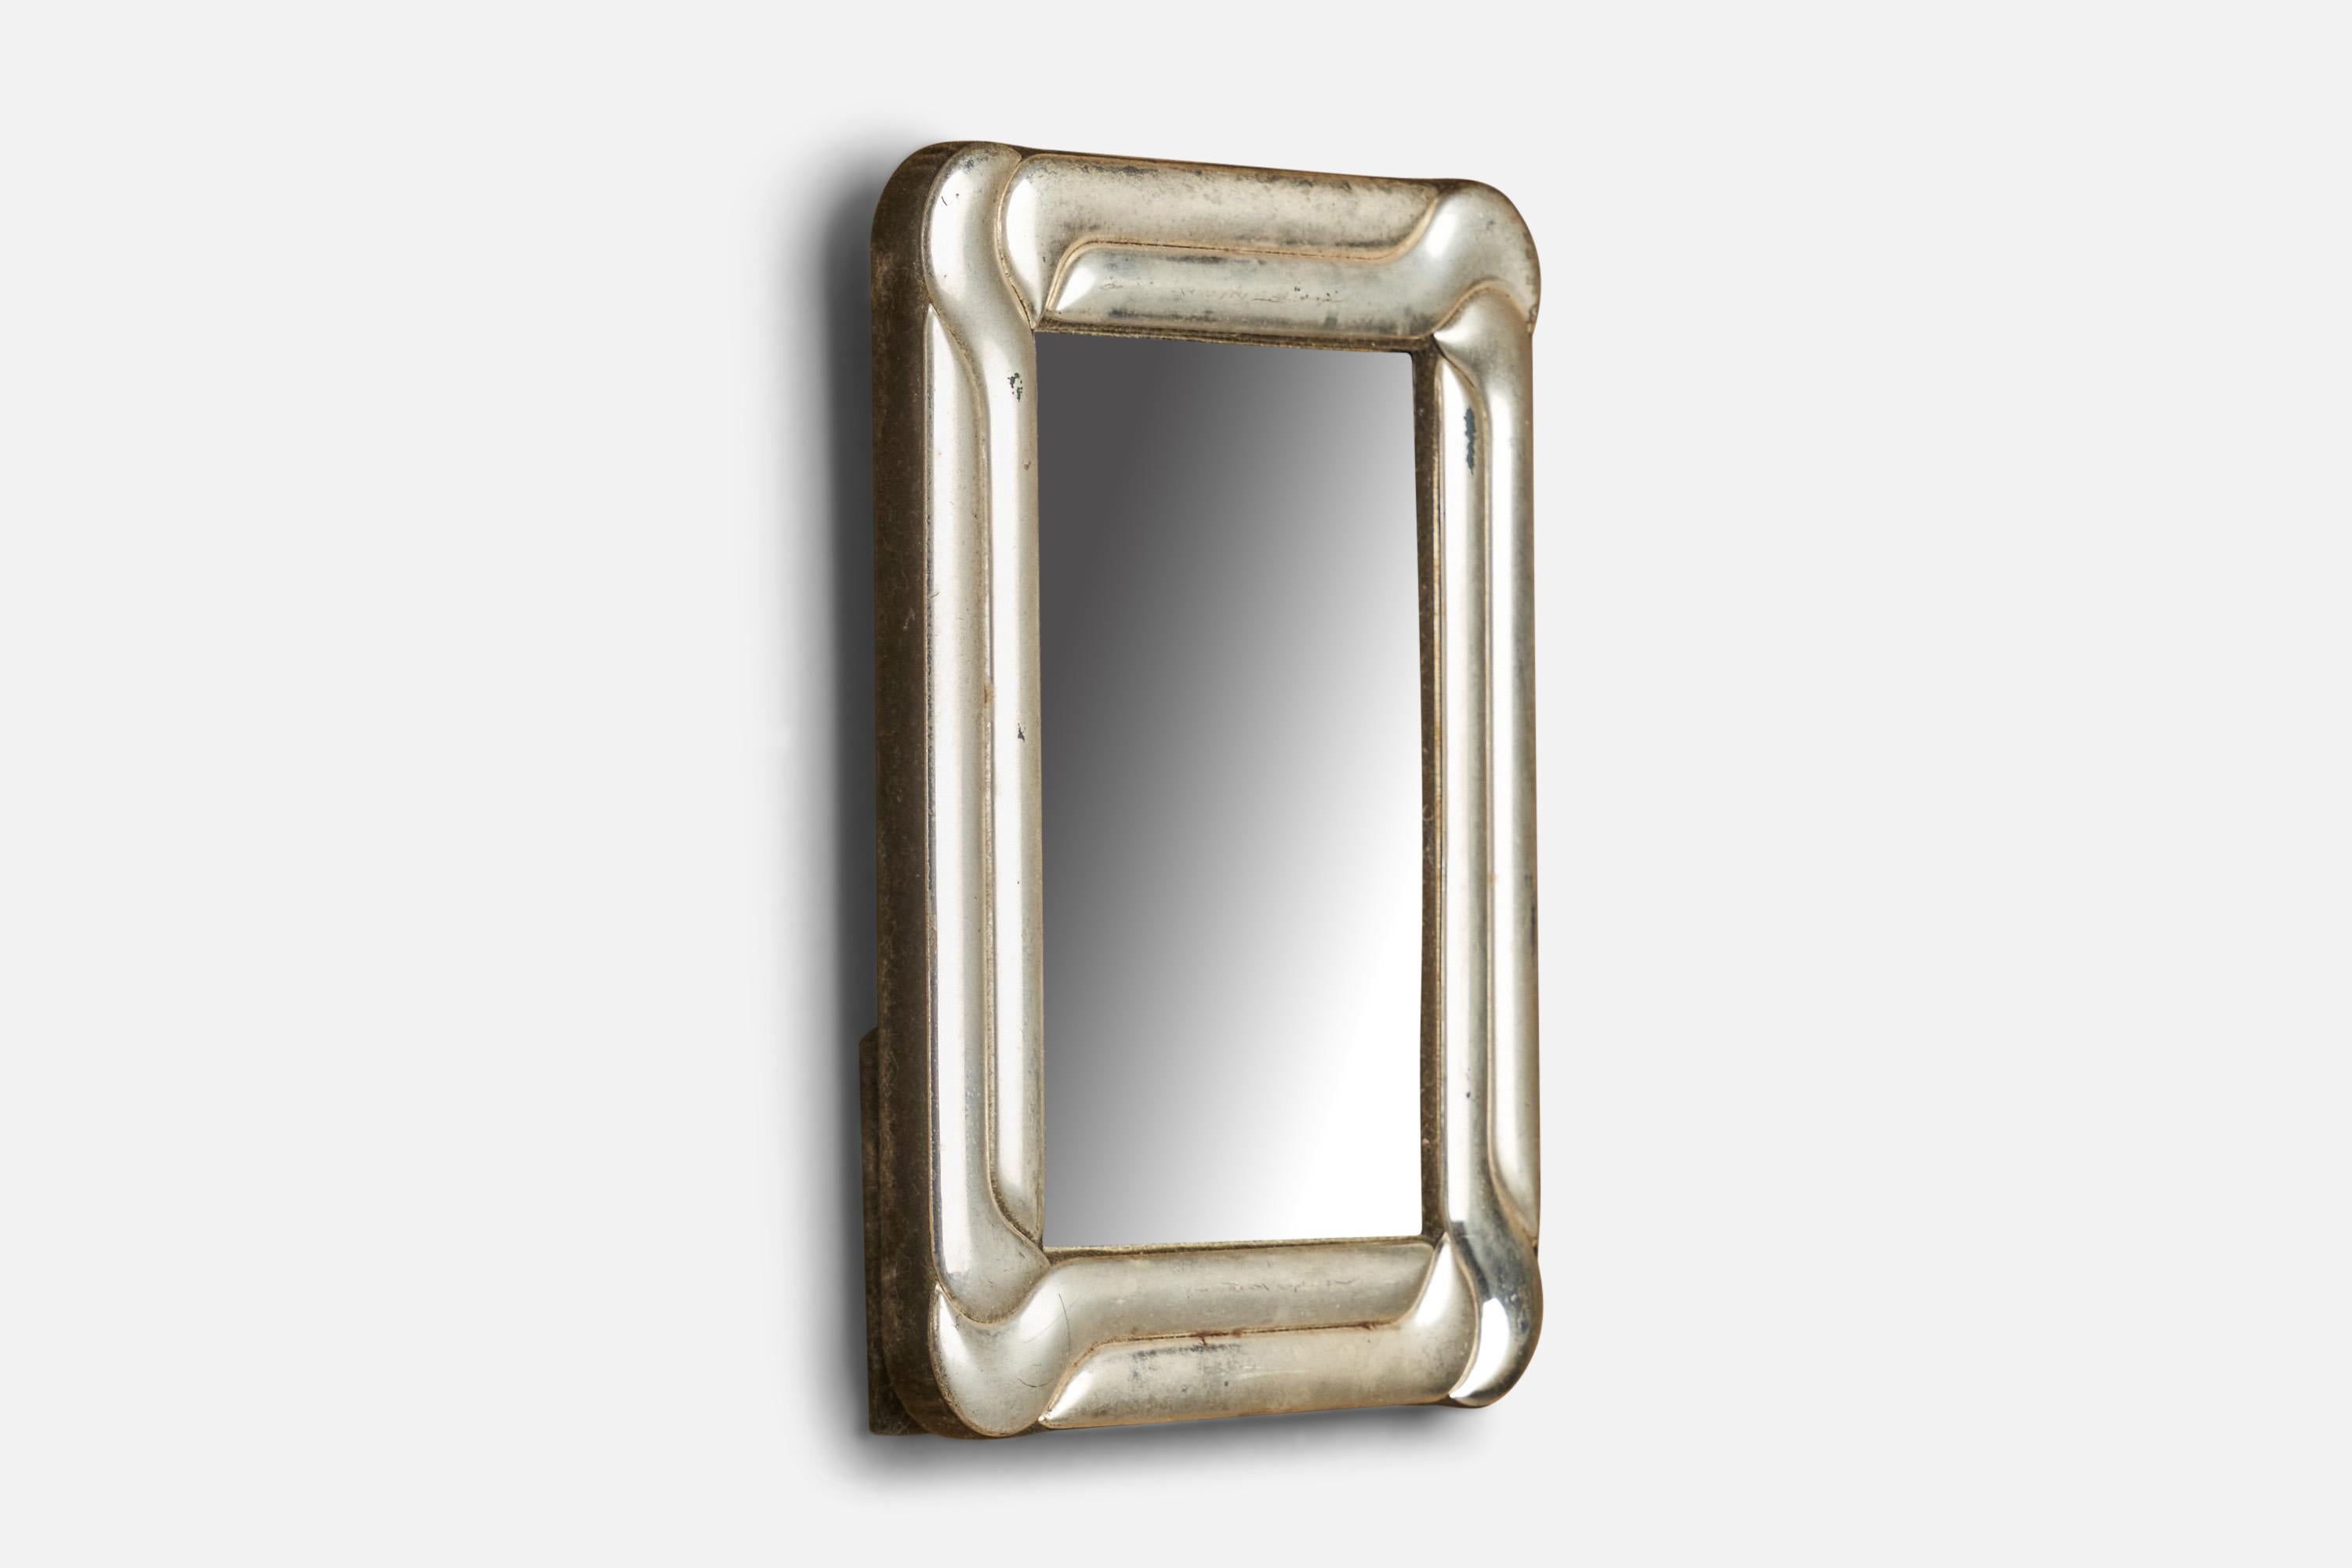 Mid-20th Century Italian Designer, Small Wall Mirror, Sterling Silver, Italy, 1930s For Sale